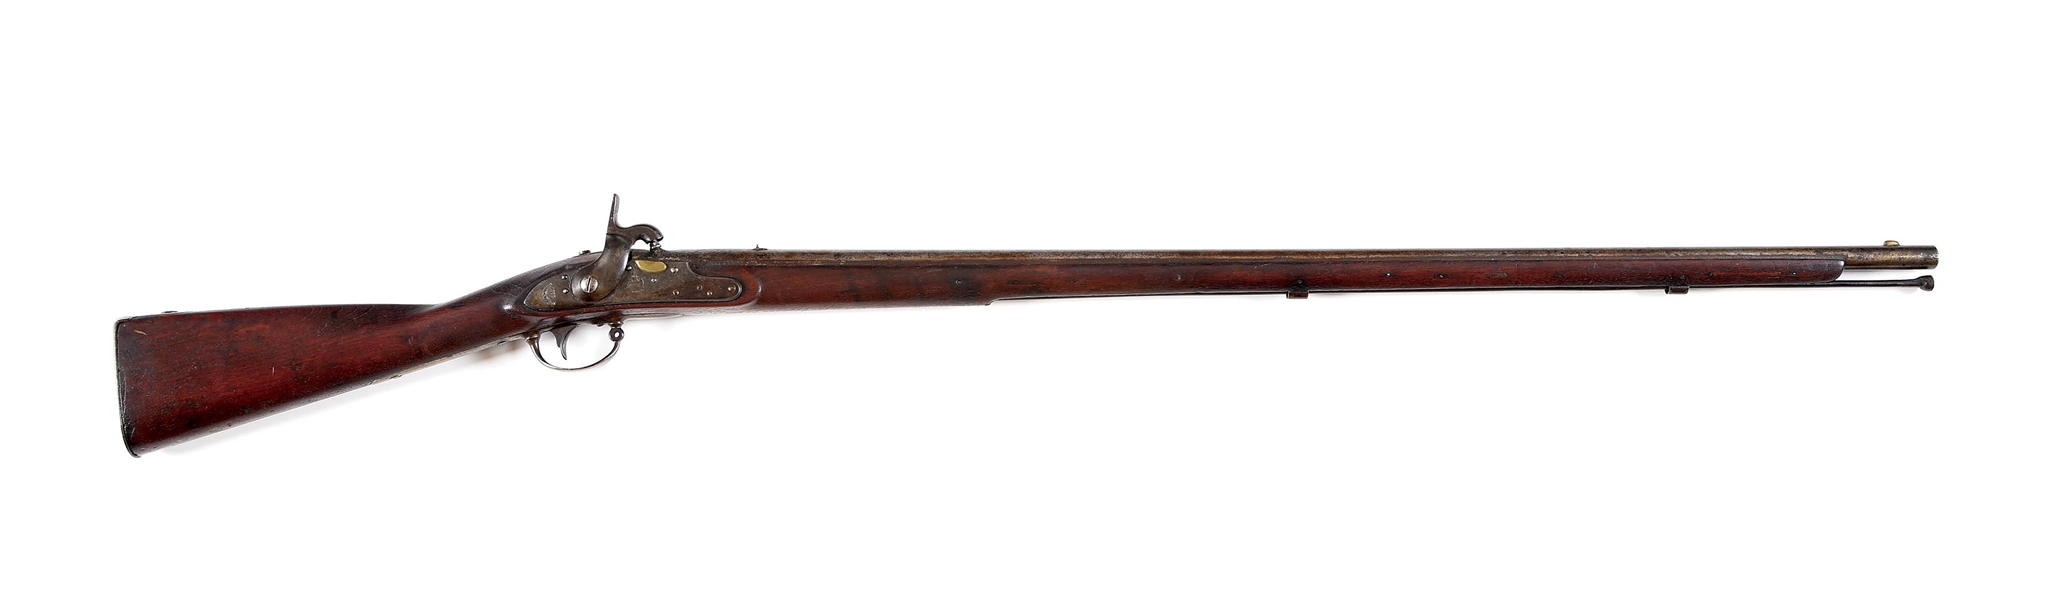 (A) IDENTIFIED ALTERED MODEL 1816 MUSKET BY JOHNSON OF BENJAMIN FLEAGLE.